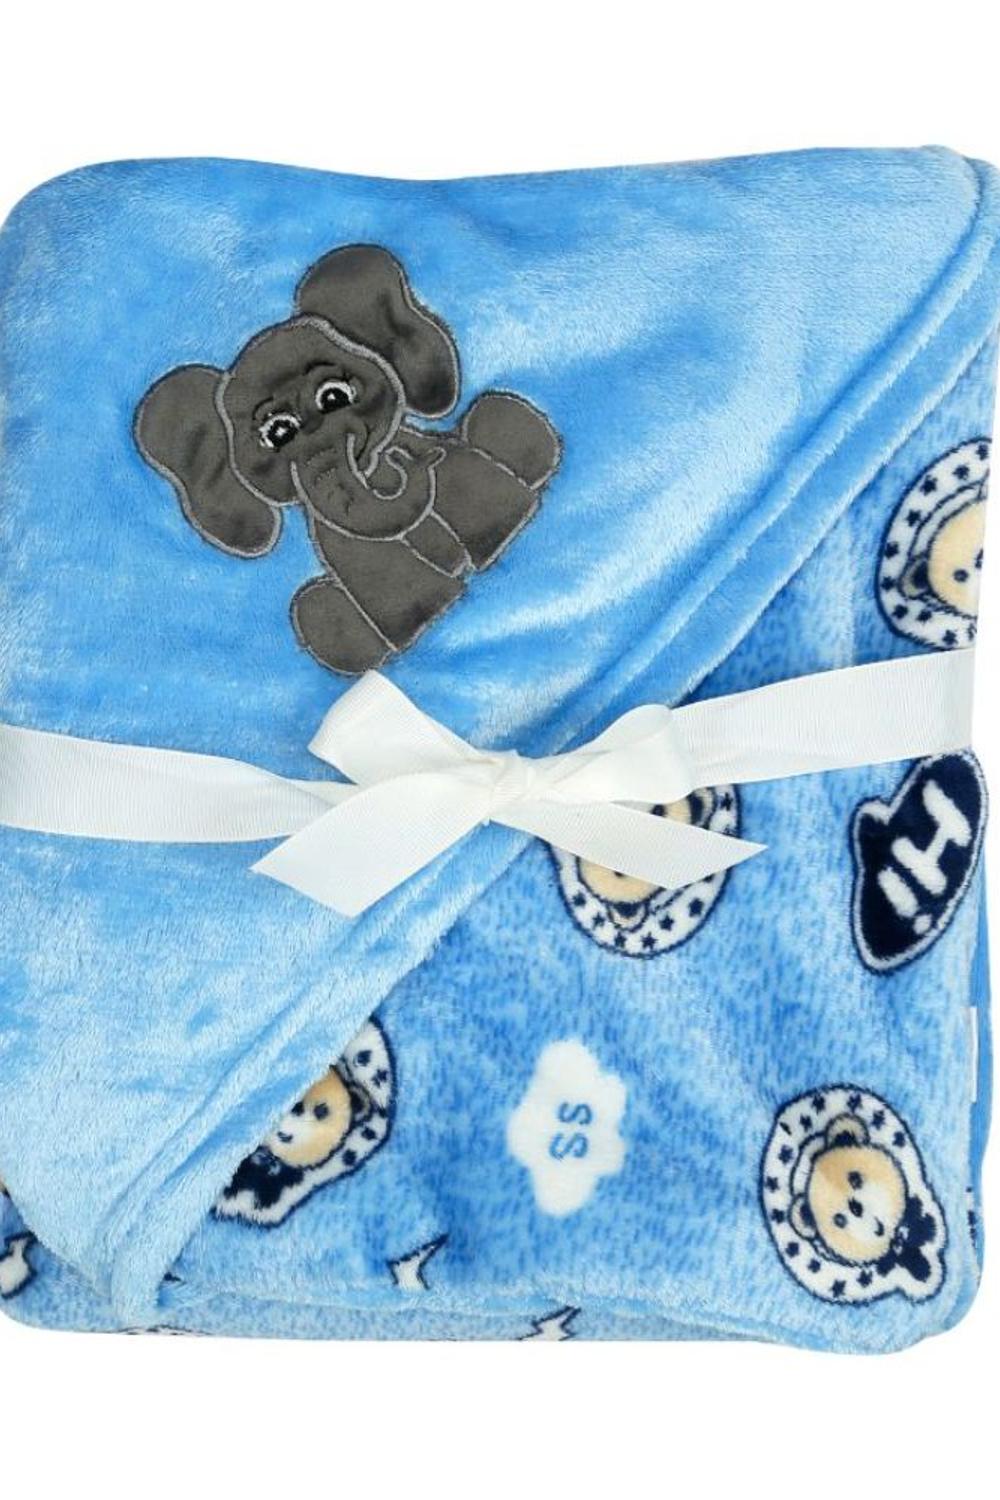 Mee Mee Baby Warm and Soft Swaddle Wrapper with Hood Double Layer for Newborn Babies (Blue)